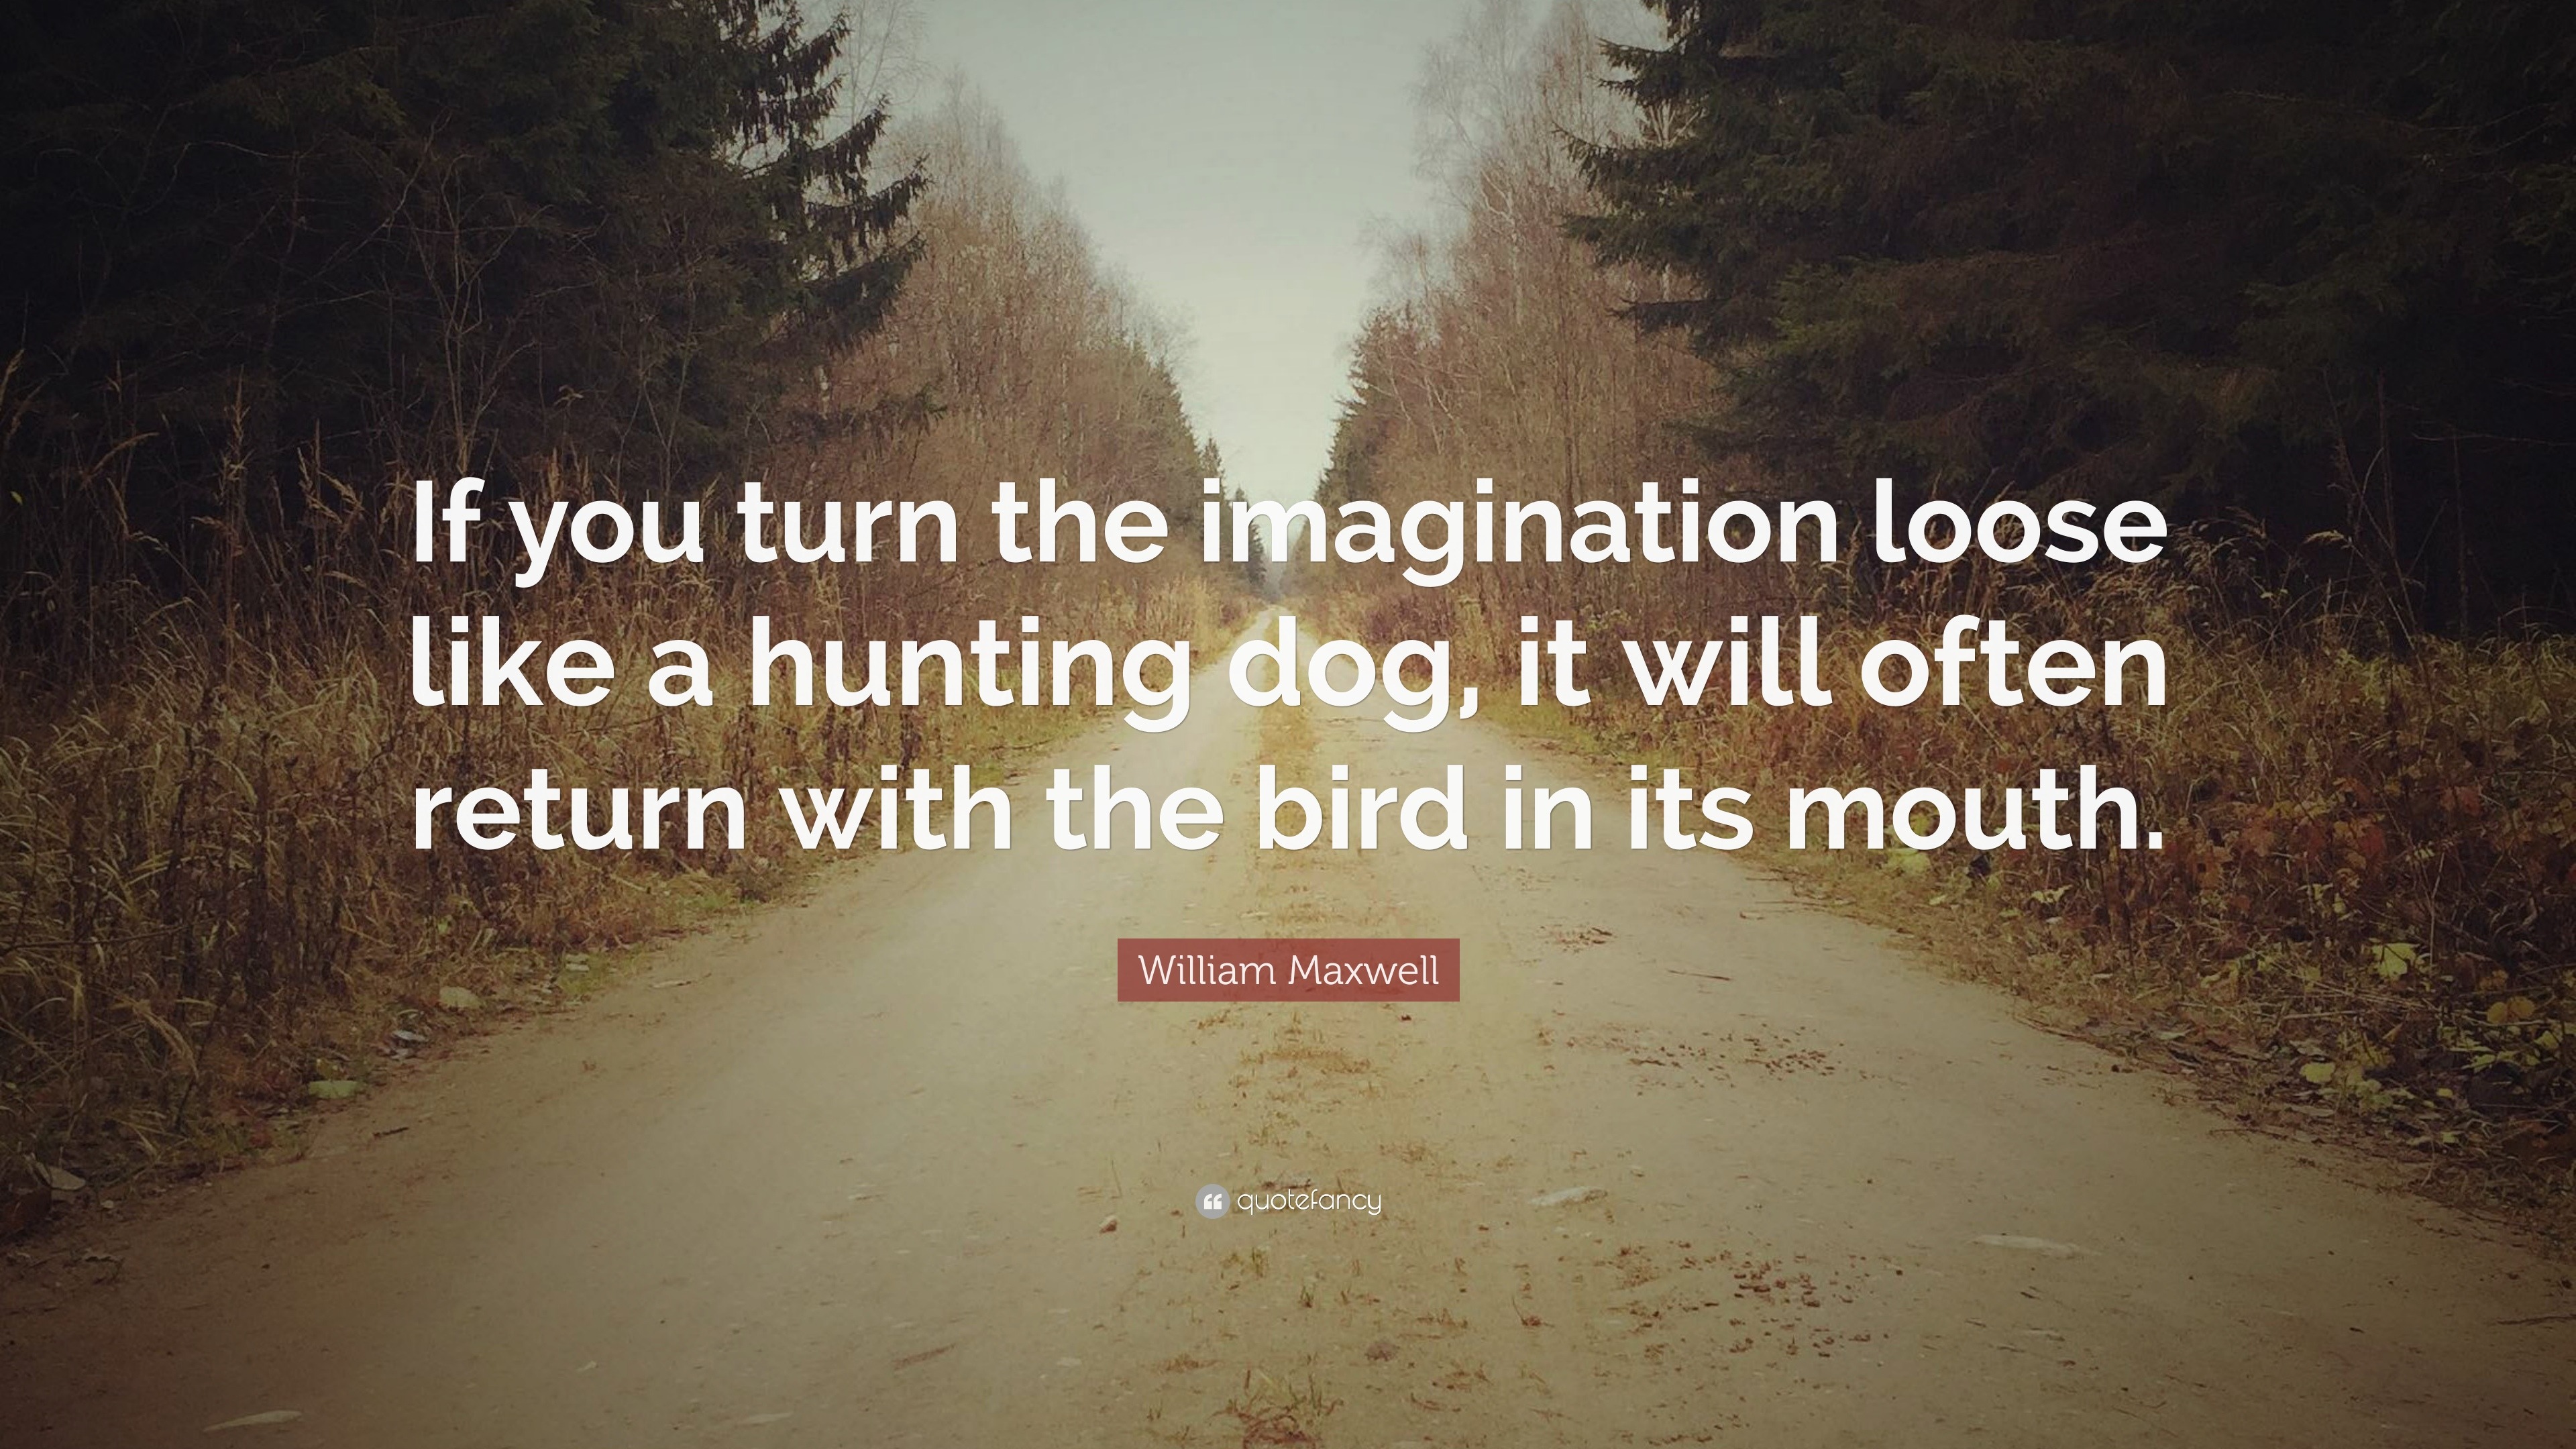 William Maxwell Quote: “If you turn the imagination loose like a ...